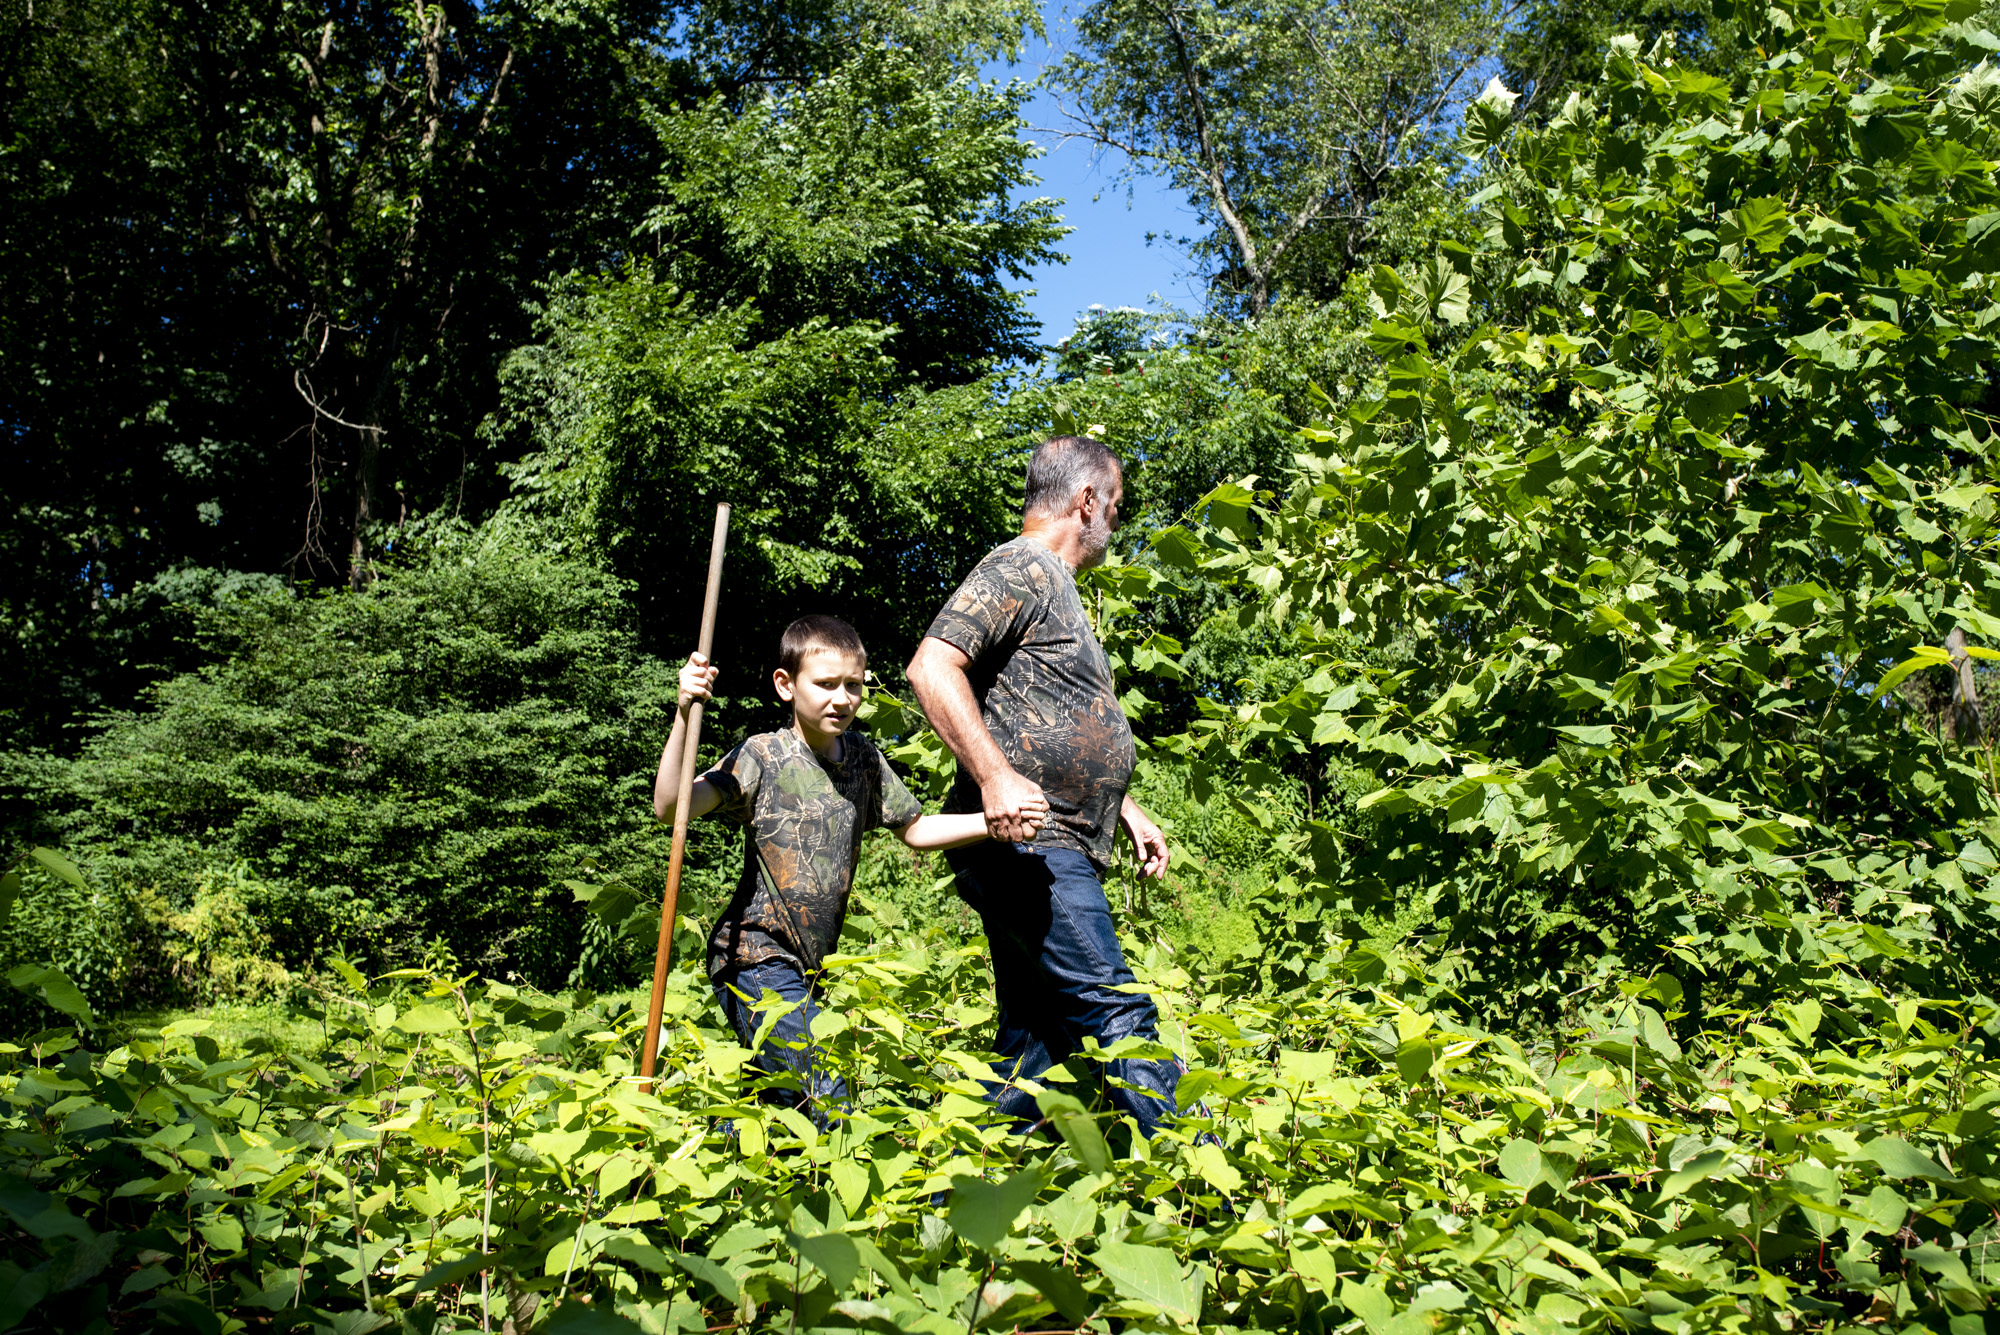  Vince Clemens and his son, Adyn Clemens, of North Huntingdon, walk through the brush to get to Brush Creek in Penn, where they hunt for snapping turtles on July 7, 2018. 